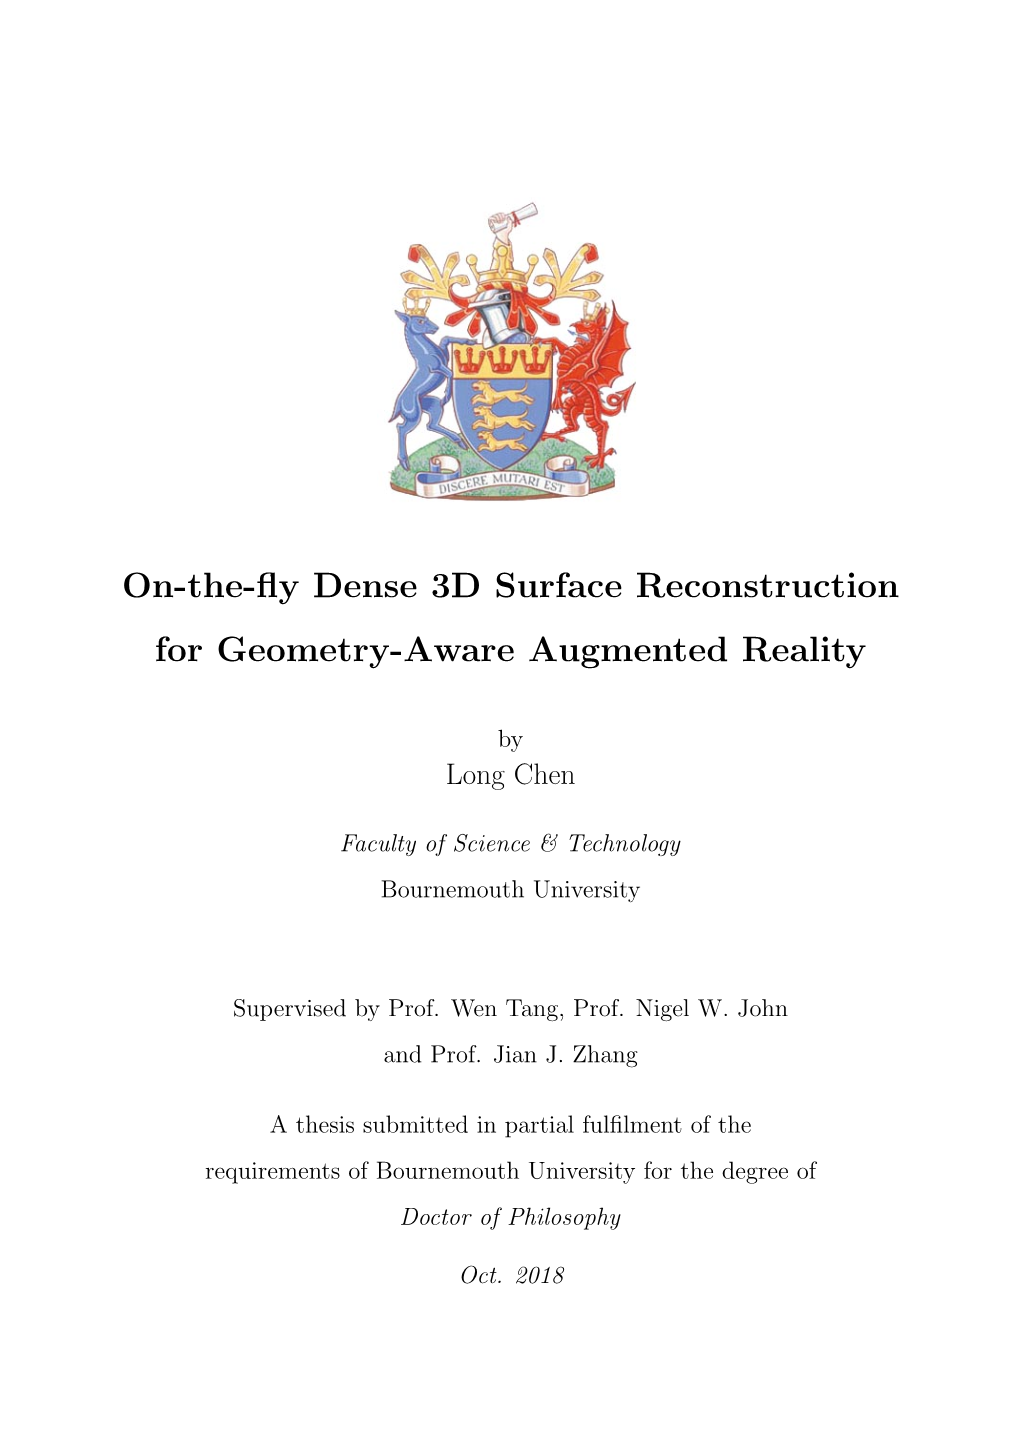 On-The-Fly Dense 3D Surface Reconstruction for Geometry-Aware Augmented Reality